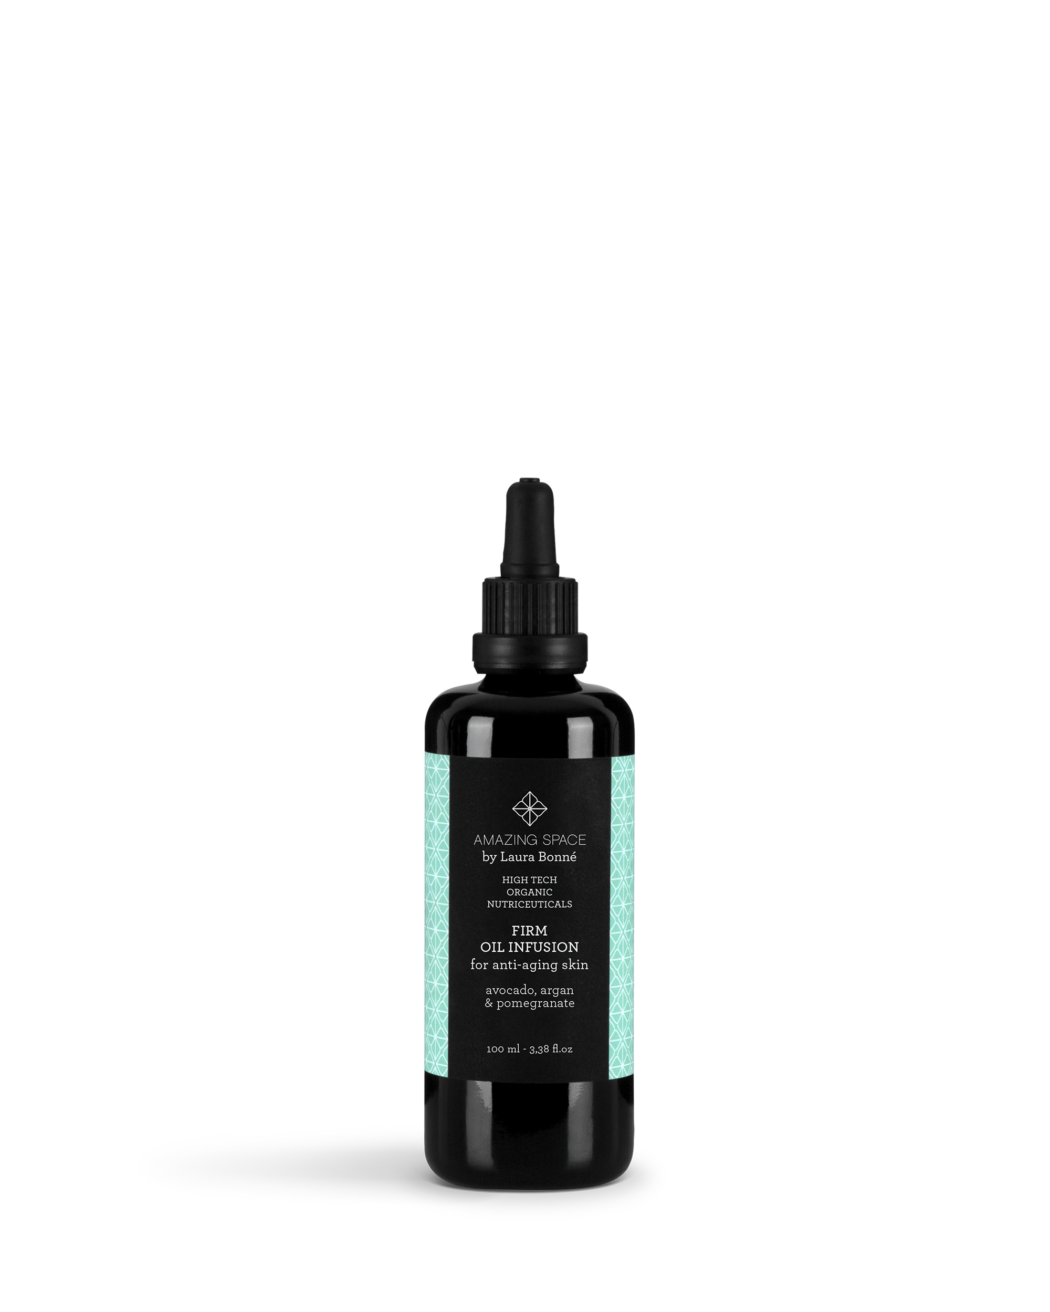 firm-oil-infusion-100ml-packshot-amazing-space-web-2023